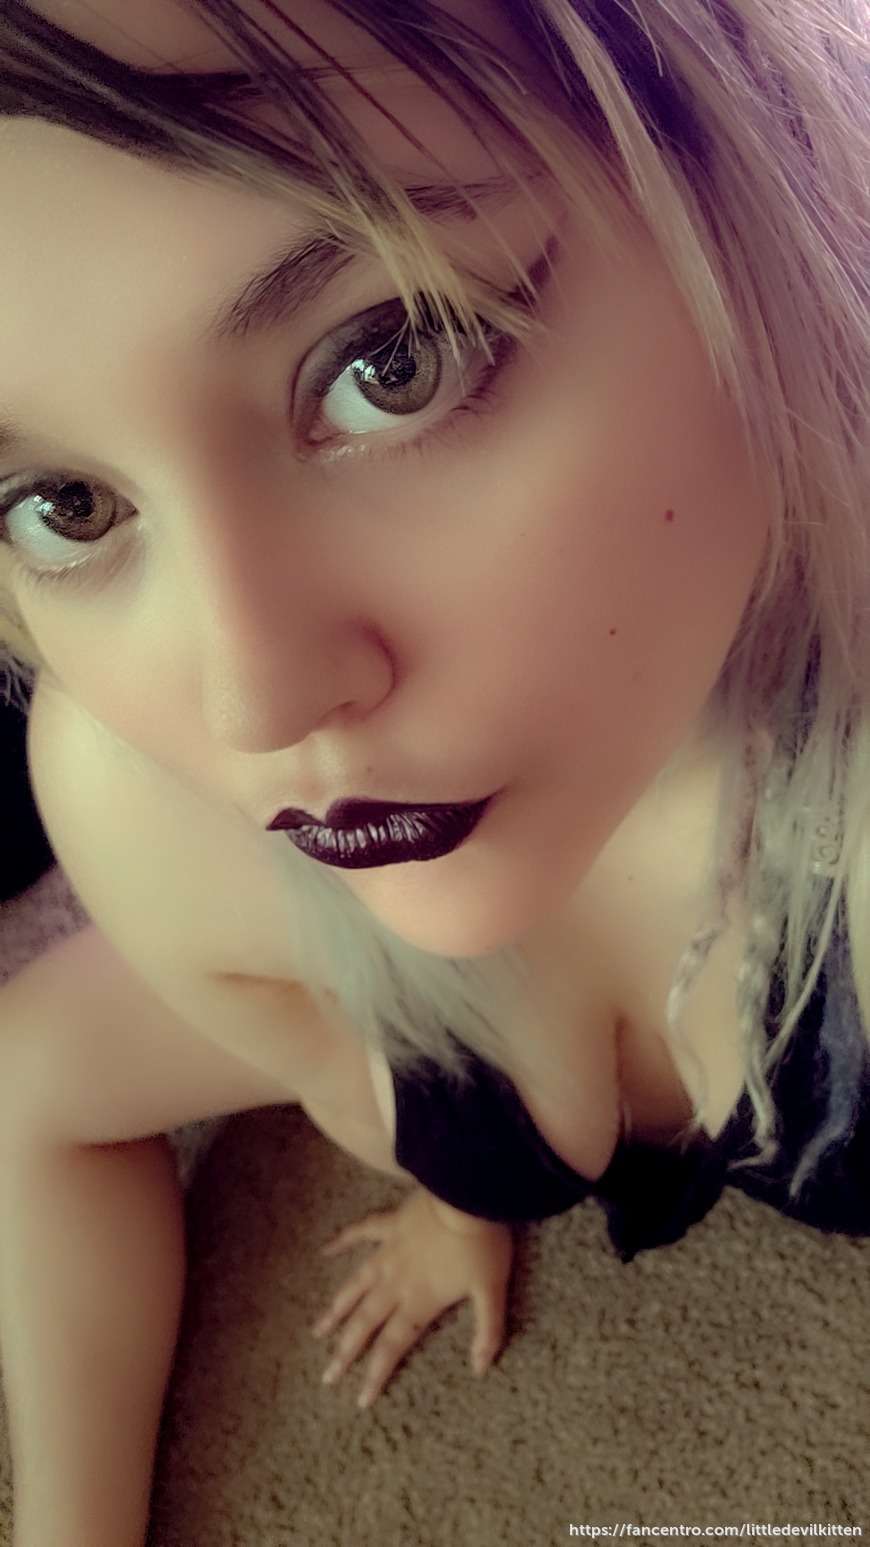 Would you fuck a goth girl?